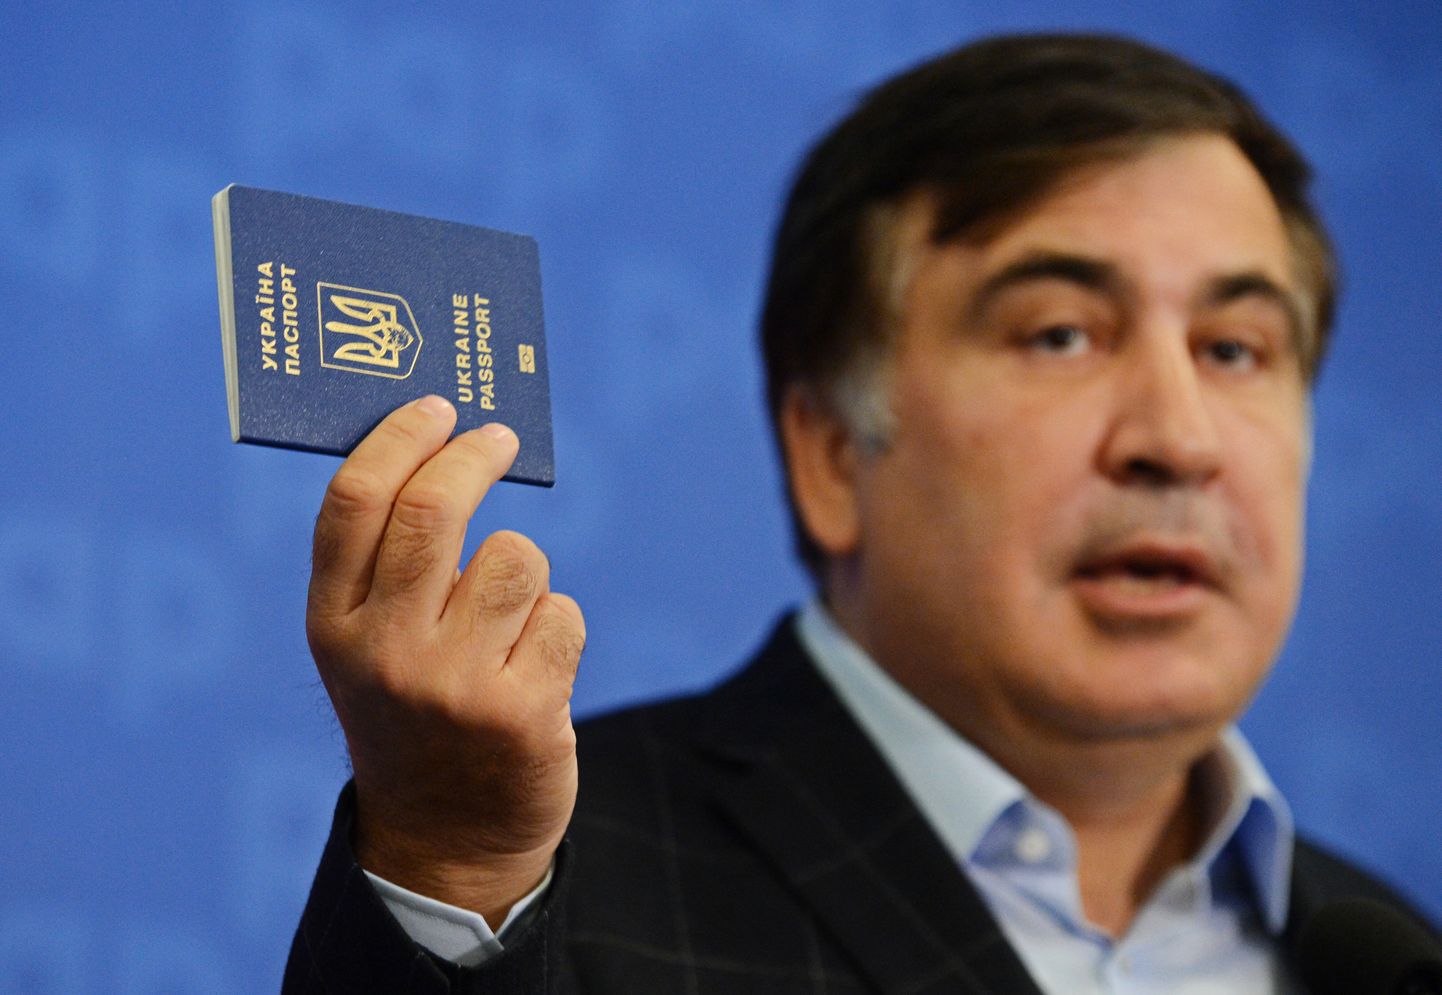 3188390 09/08/2017 Mikheil Sakashvili, leader if the New Forces Movement and former head of the Odessa region, shows his Ukrainian passport during a news conference in Warsaw. Alexey Vitvitsky/Sputnik